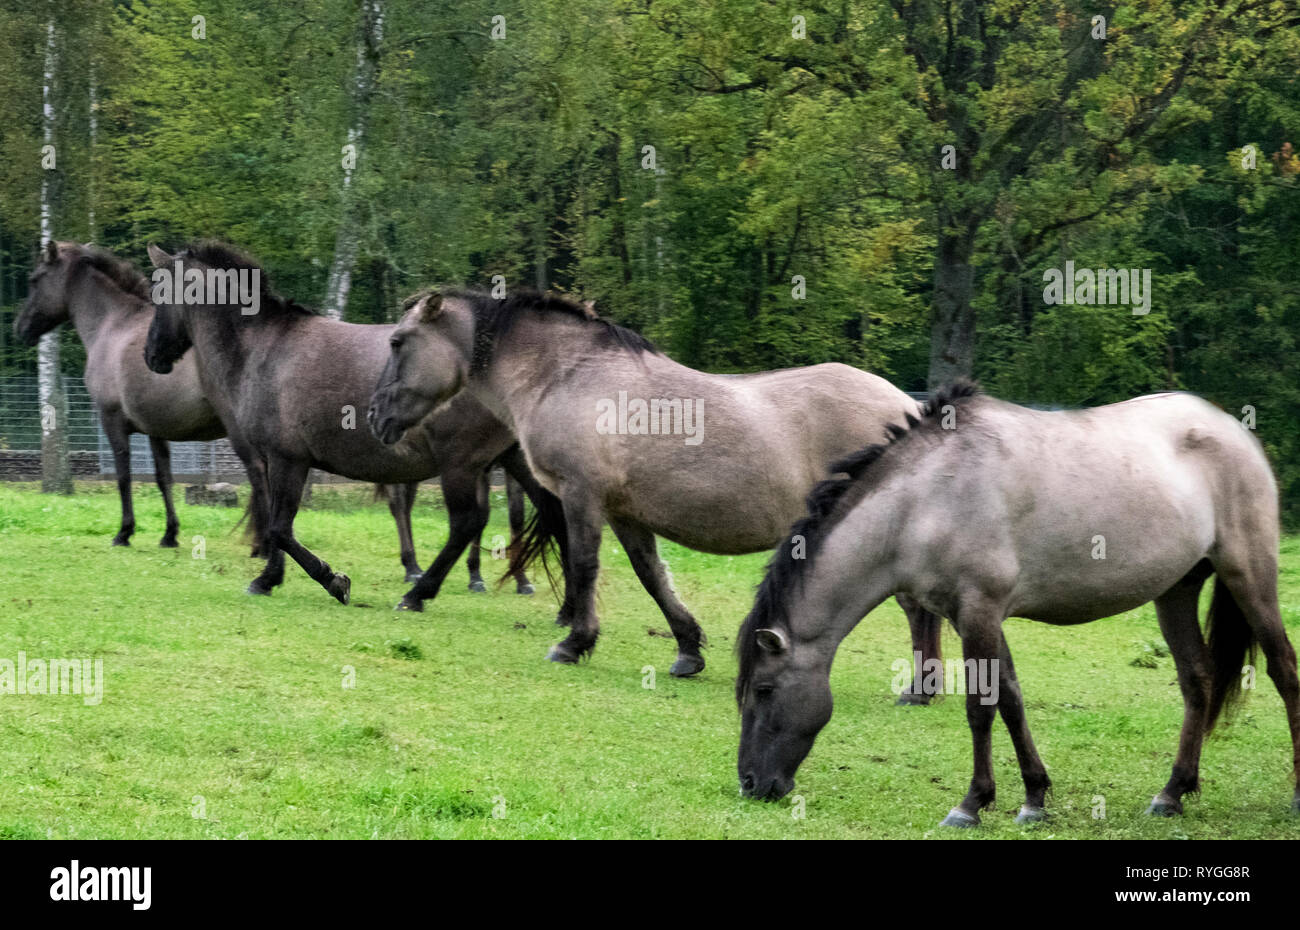 A herd of the famous and rare Konik horses of Bialowieza National Park in eastern Poland believed to be descendants of the prehistoric Tarpan horse Stock Photo